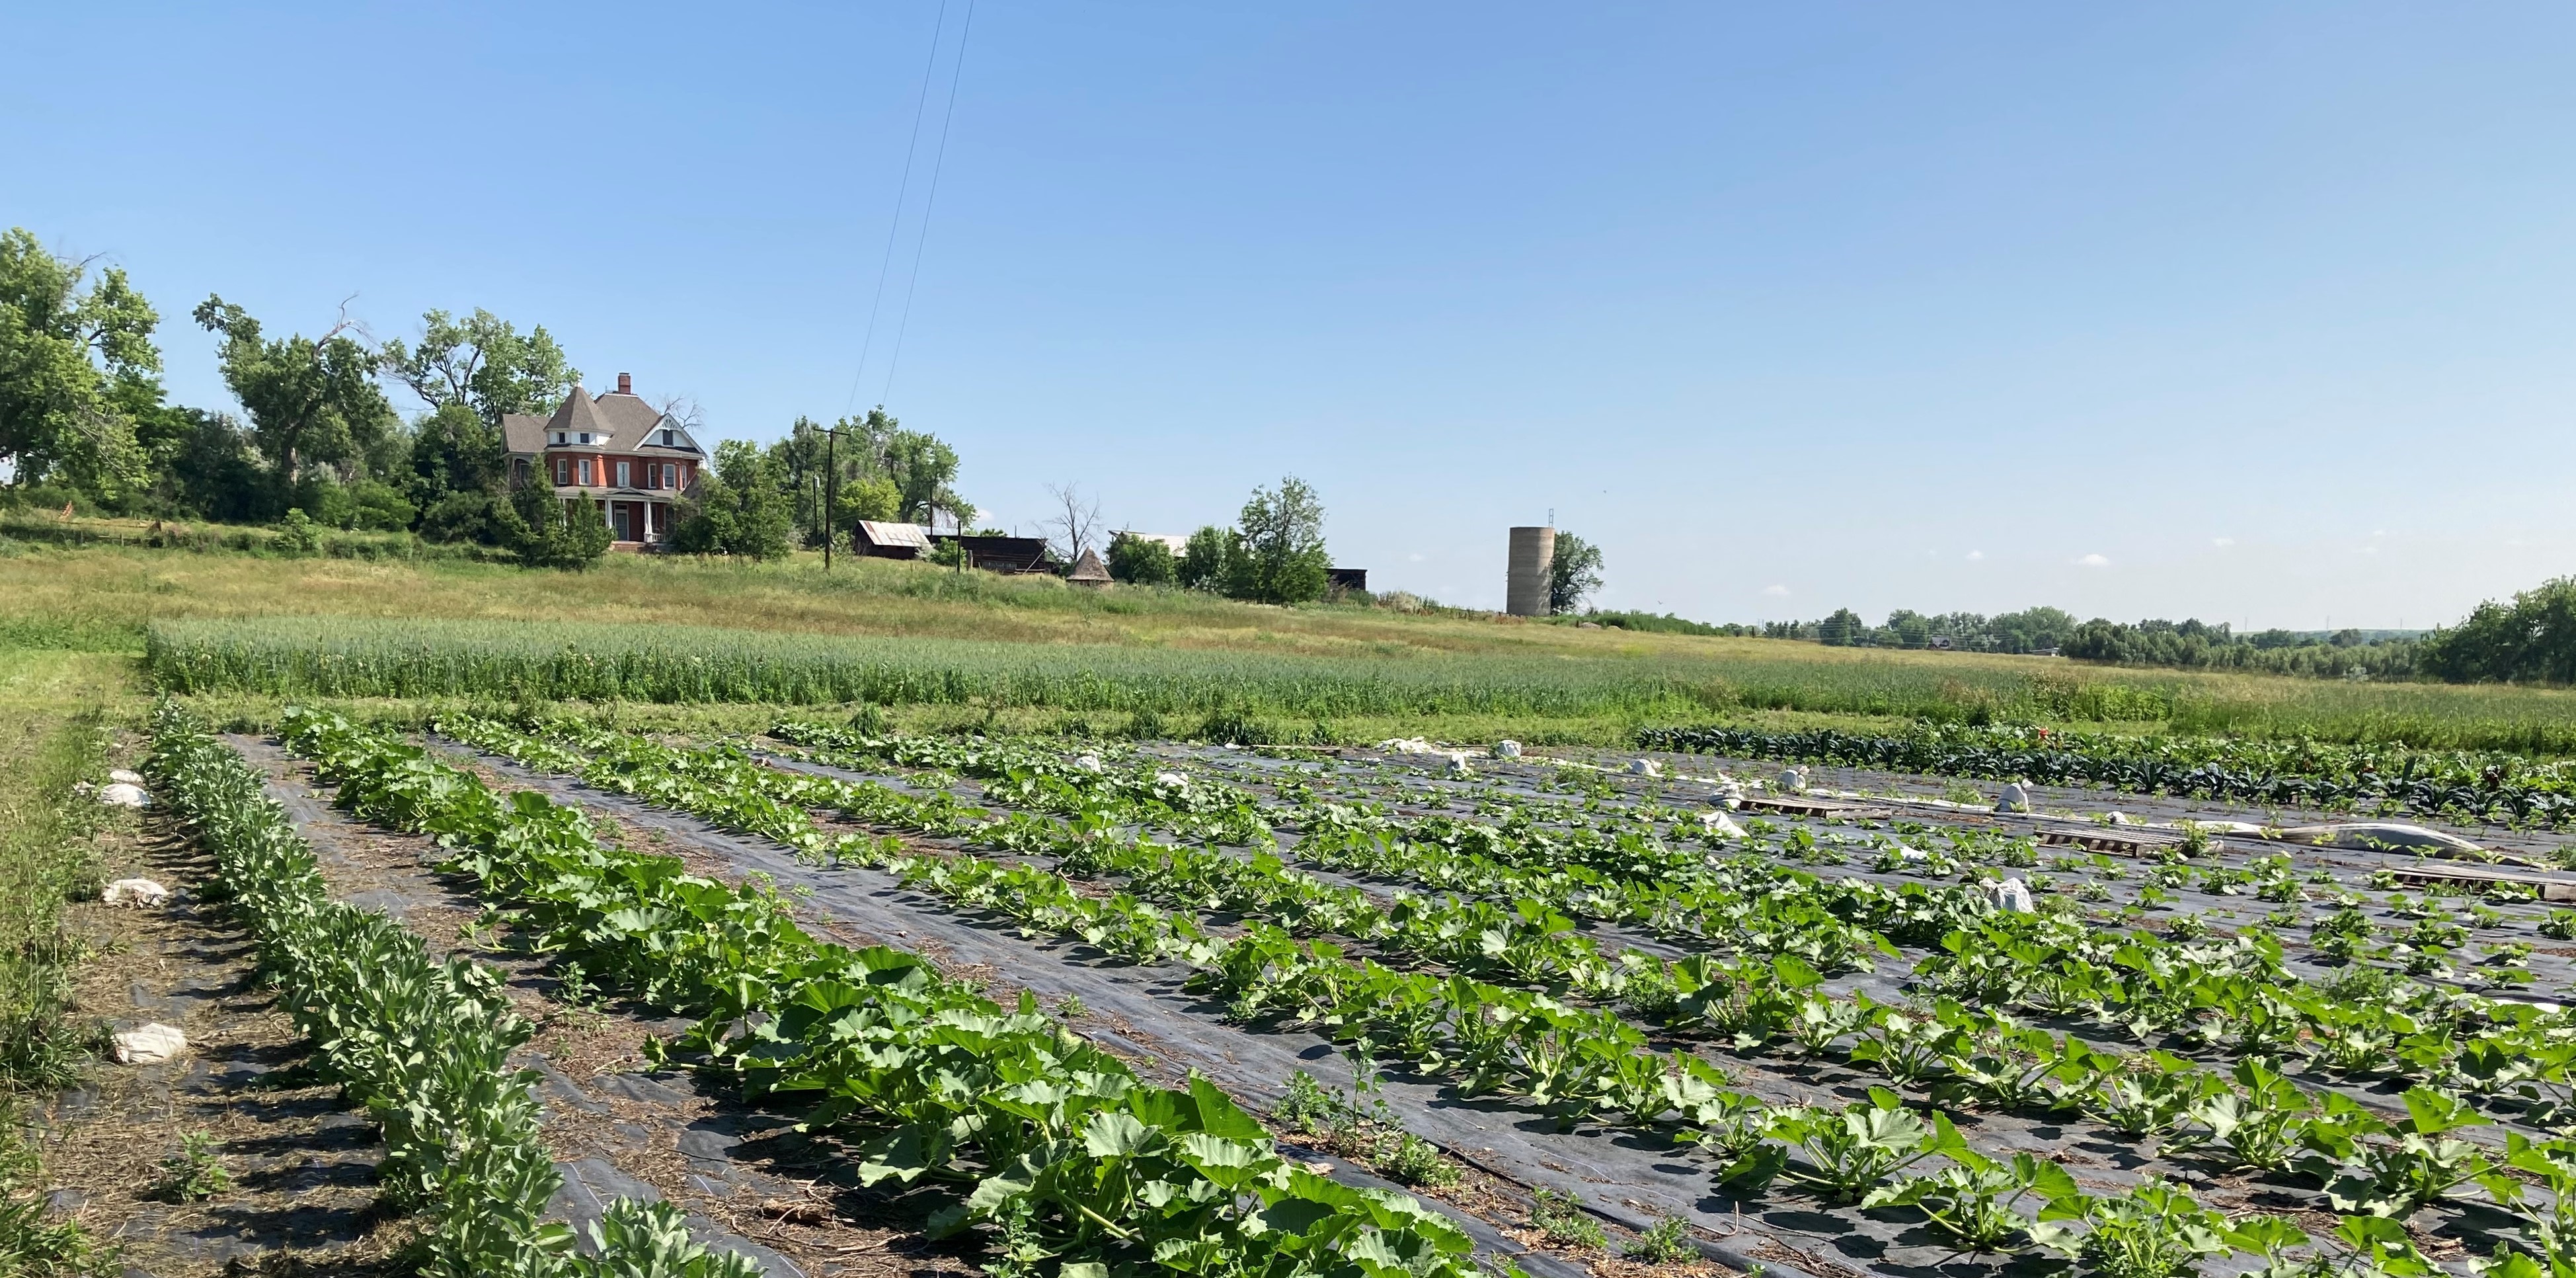 Rows of vegetables growing in the agricultural production area. The historic Queen Anne style house and farmstead structures are in the background to the north